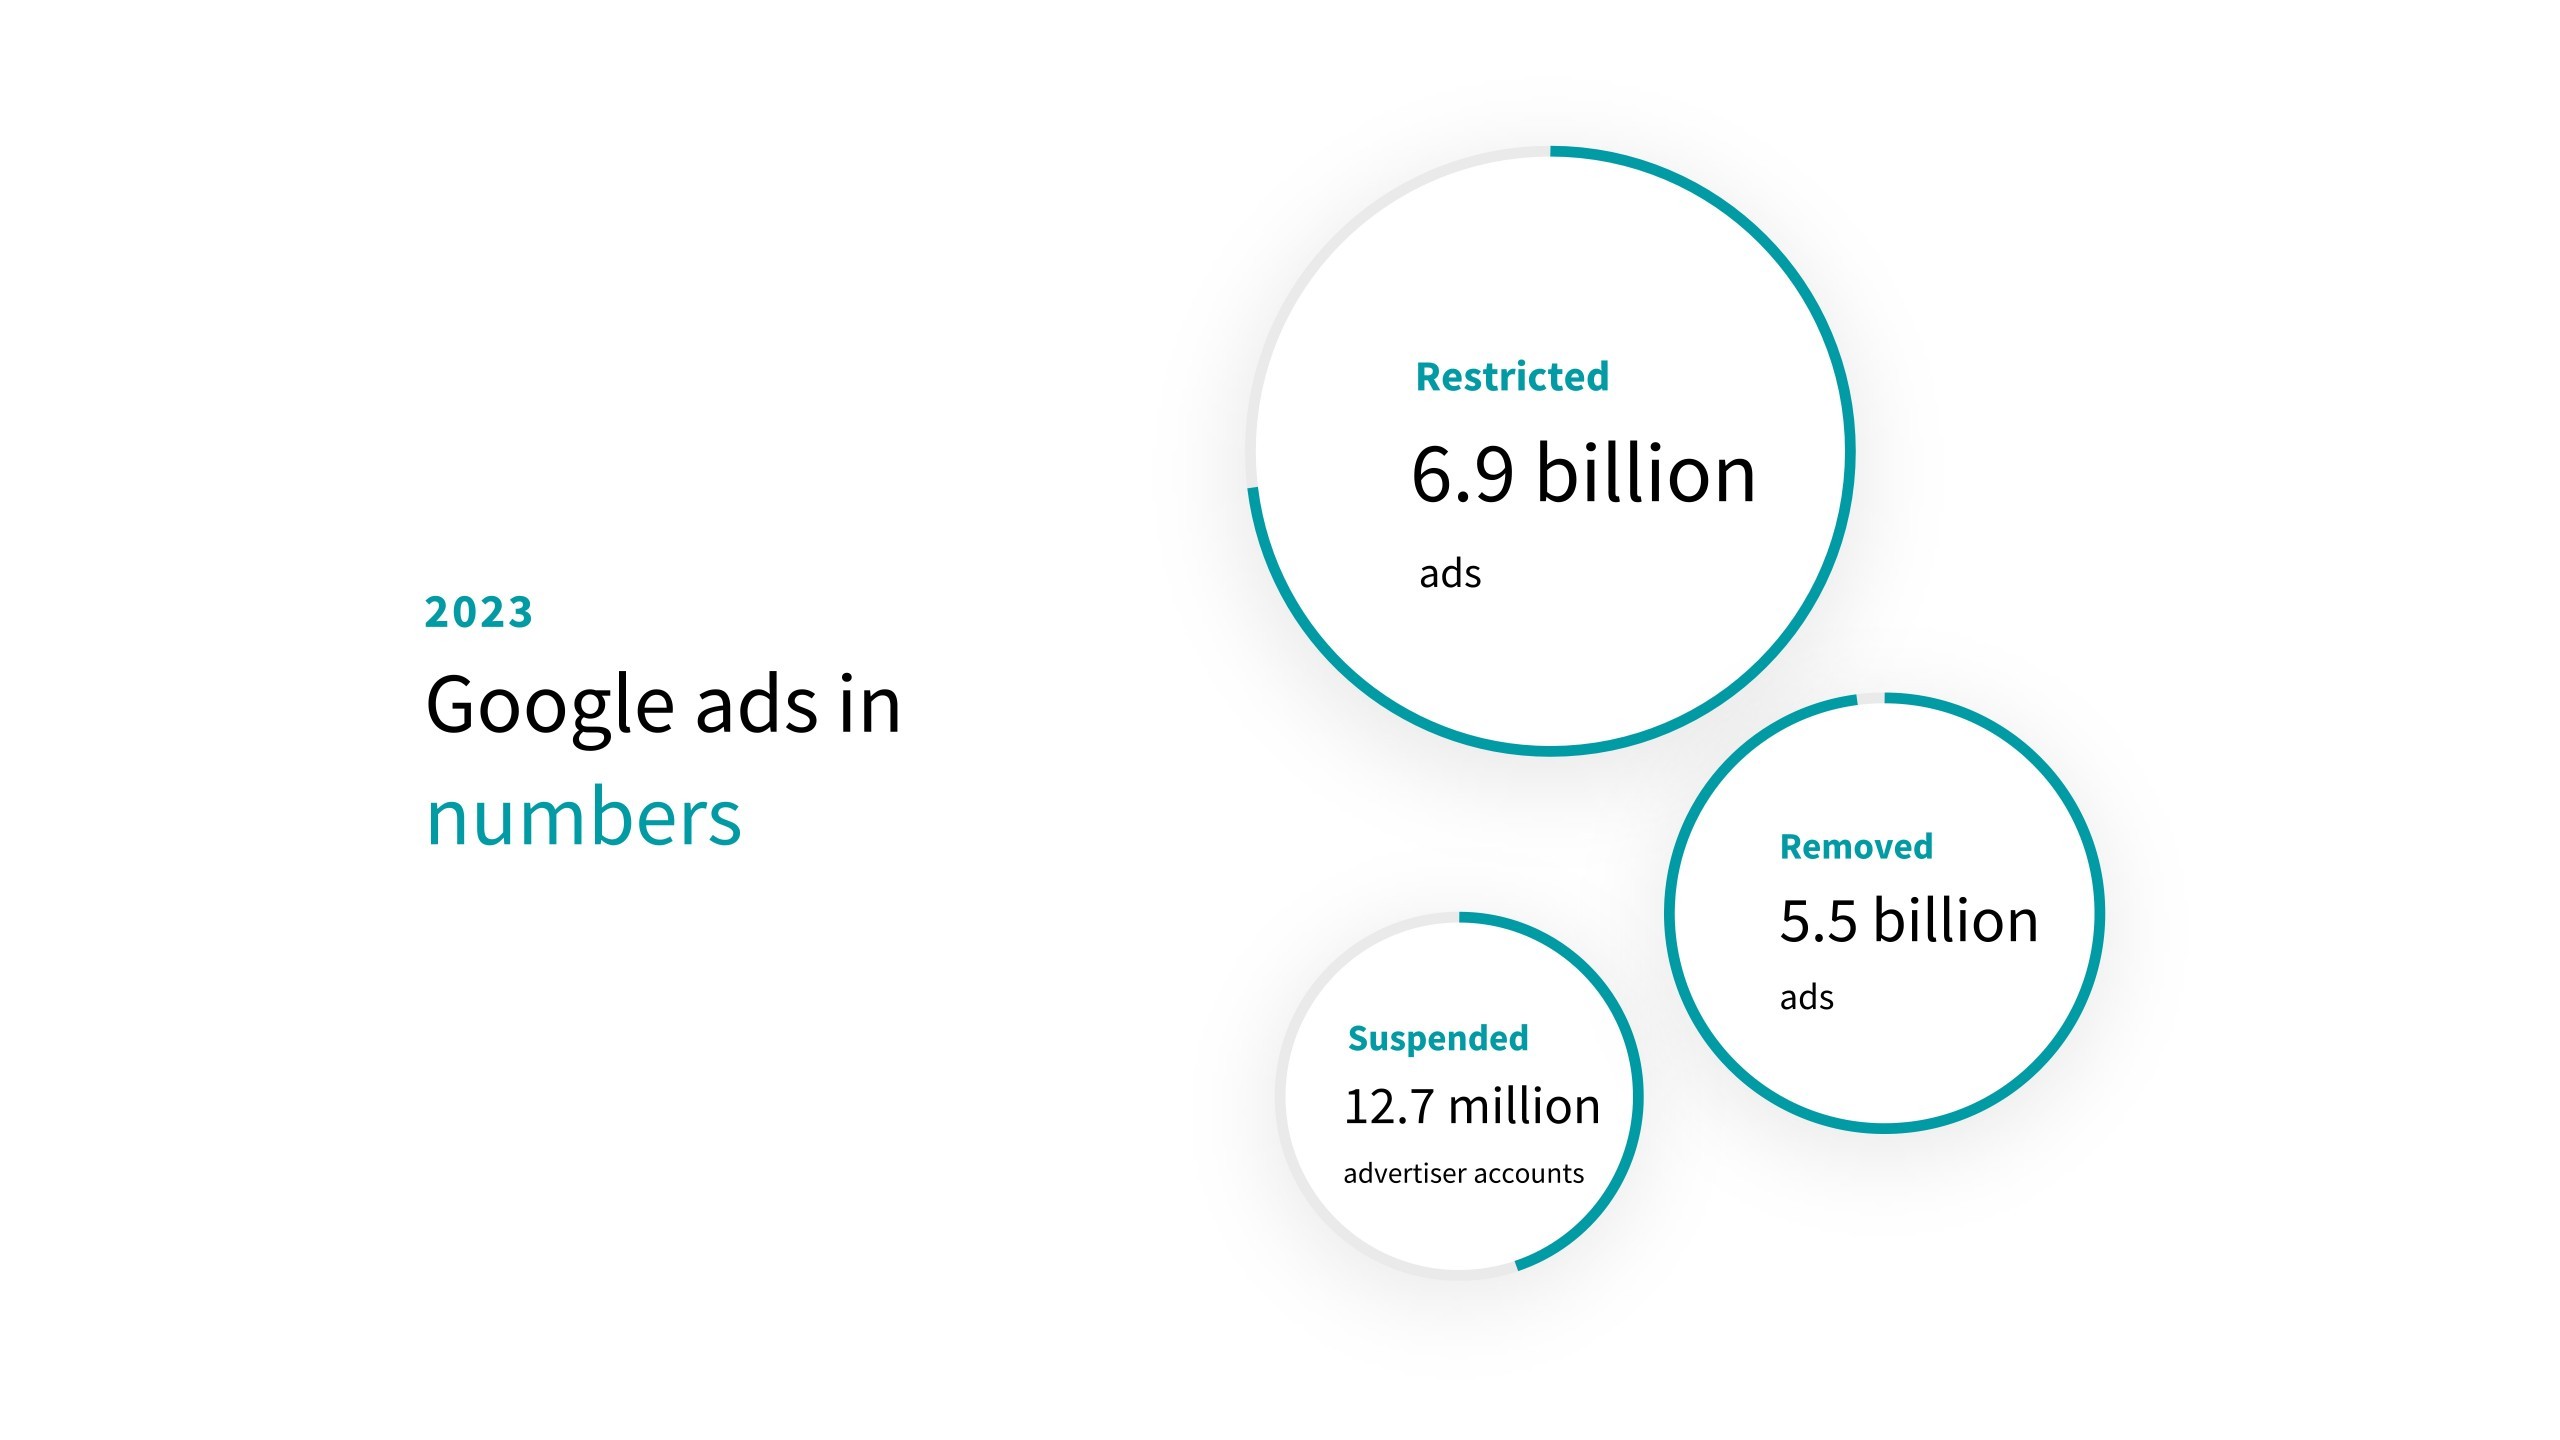 Graphic created by globaleyez, which shows the key figures for Google’s fight against fraudulent ads in 2023